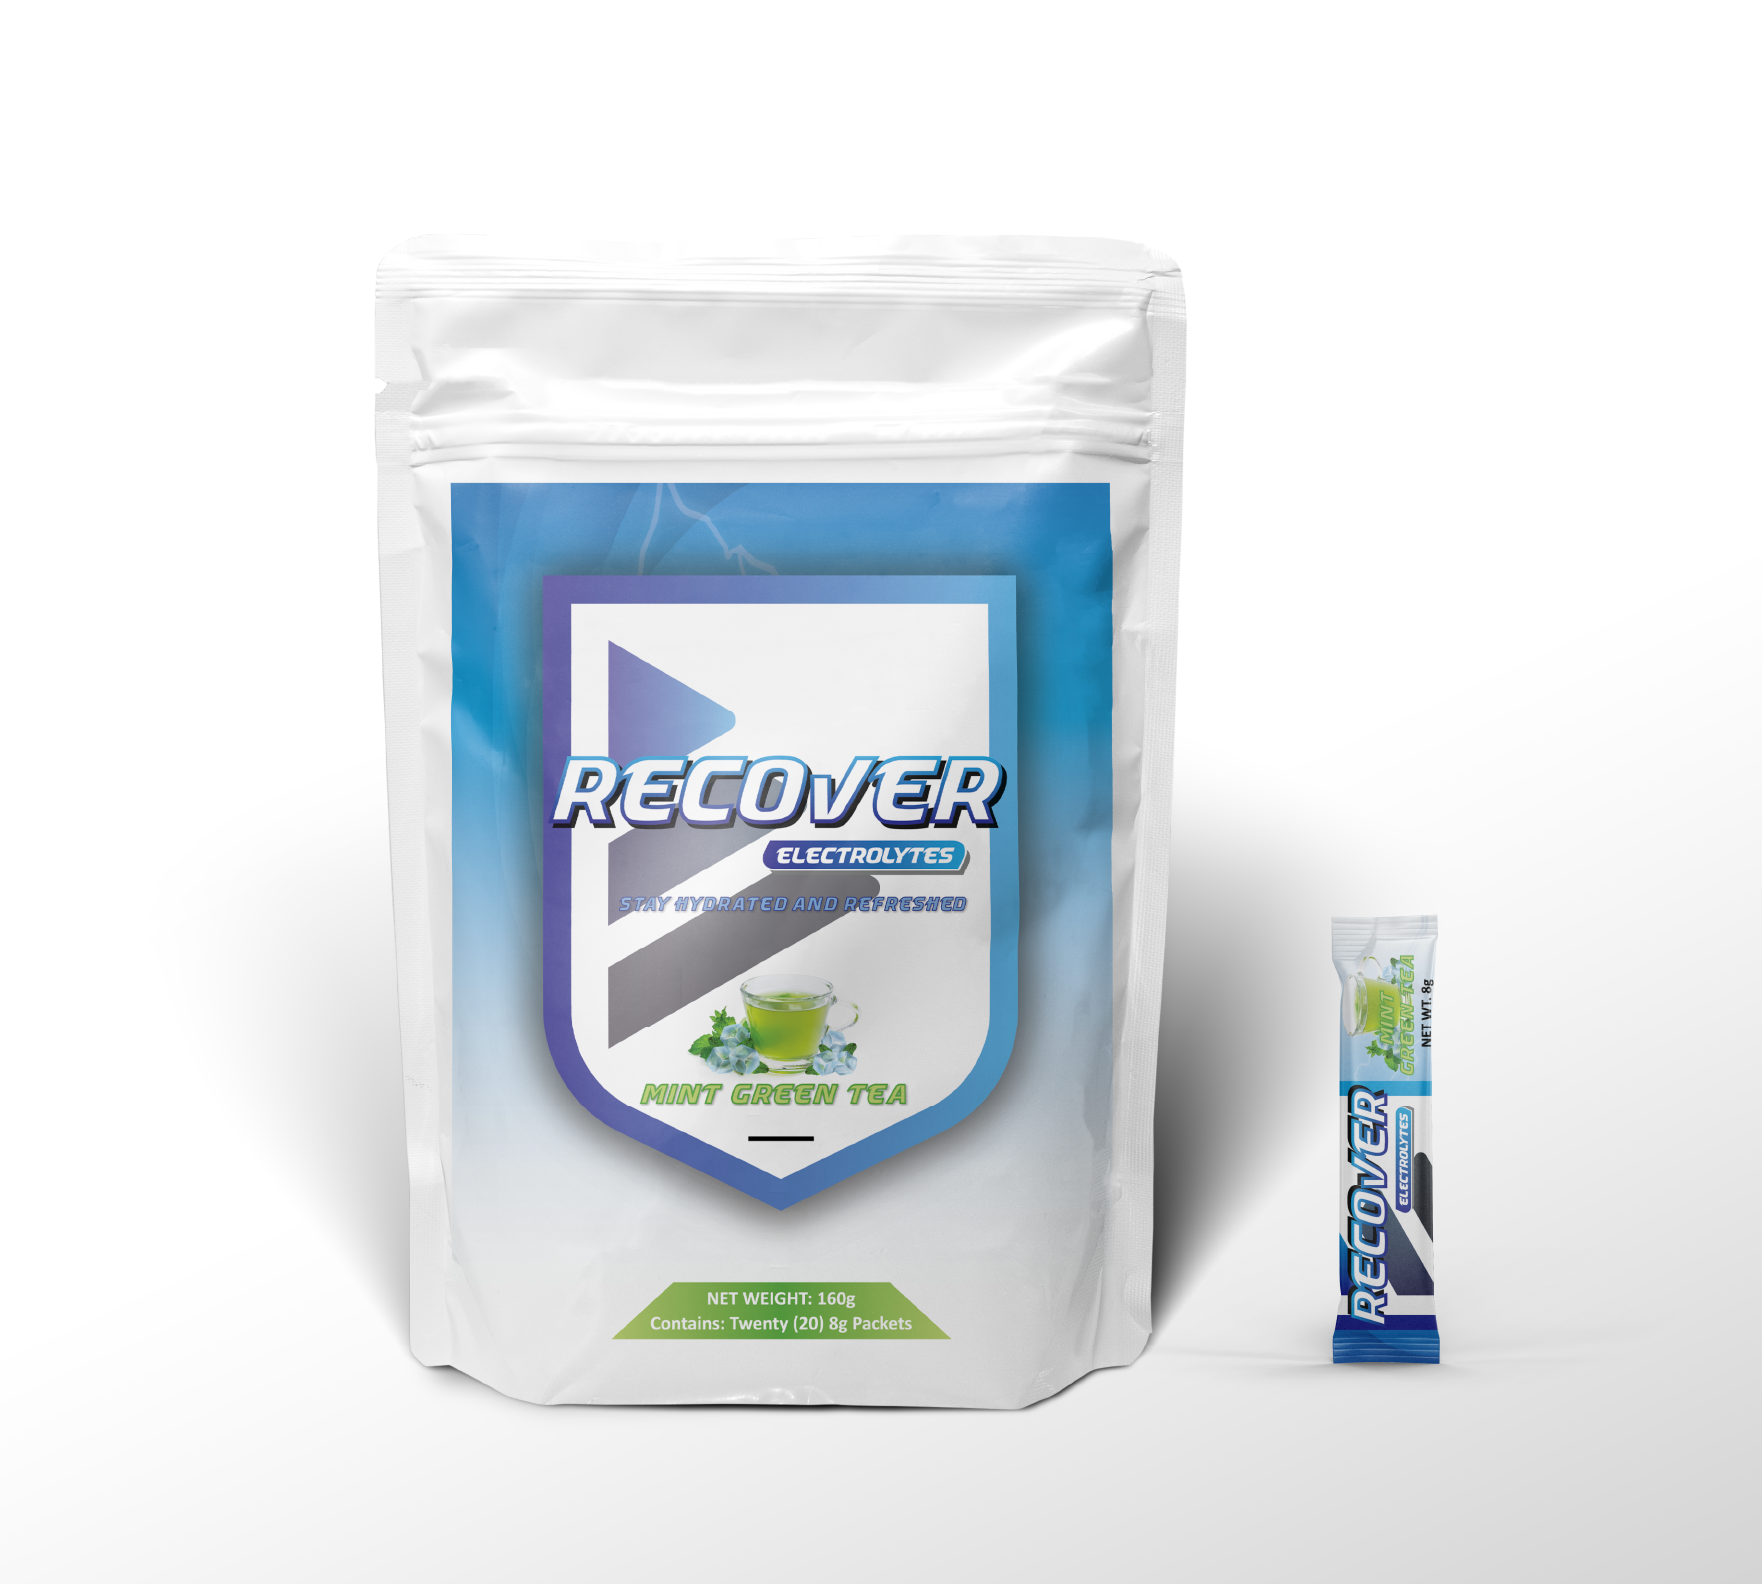 RECOVER Electrolytes